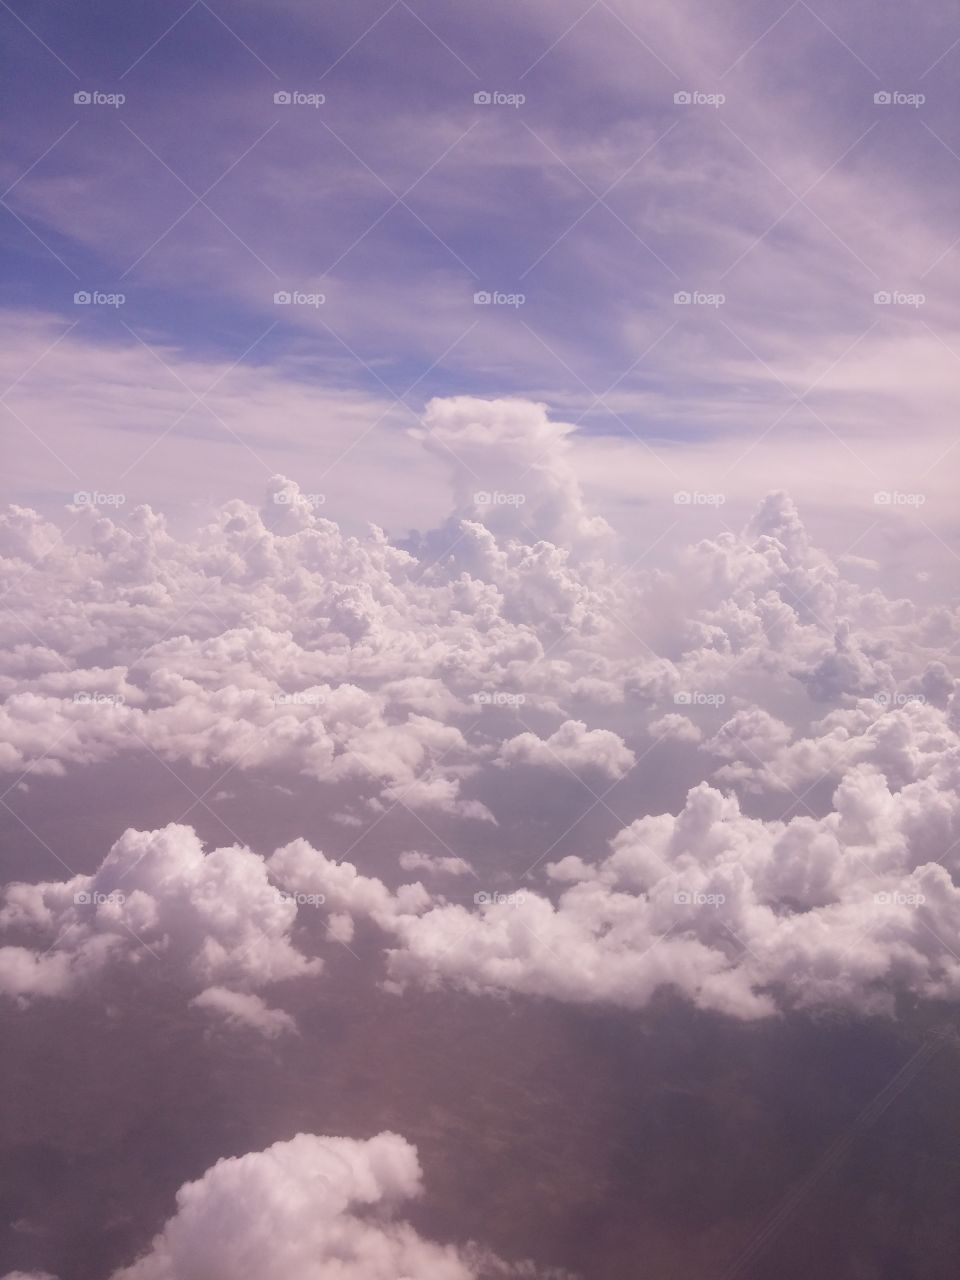 Flying High. I just love flying on cloudy days!